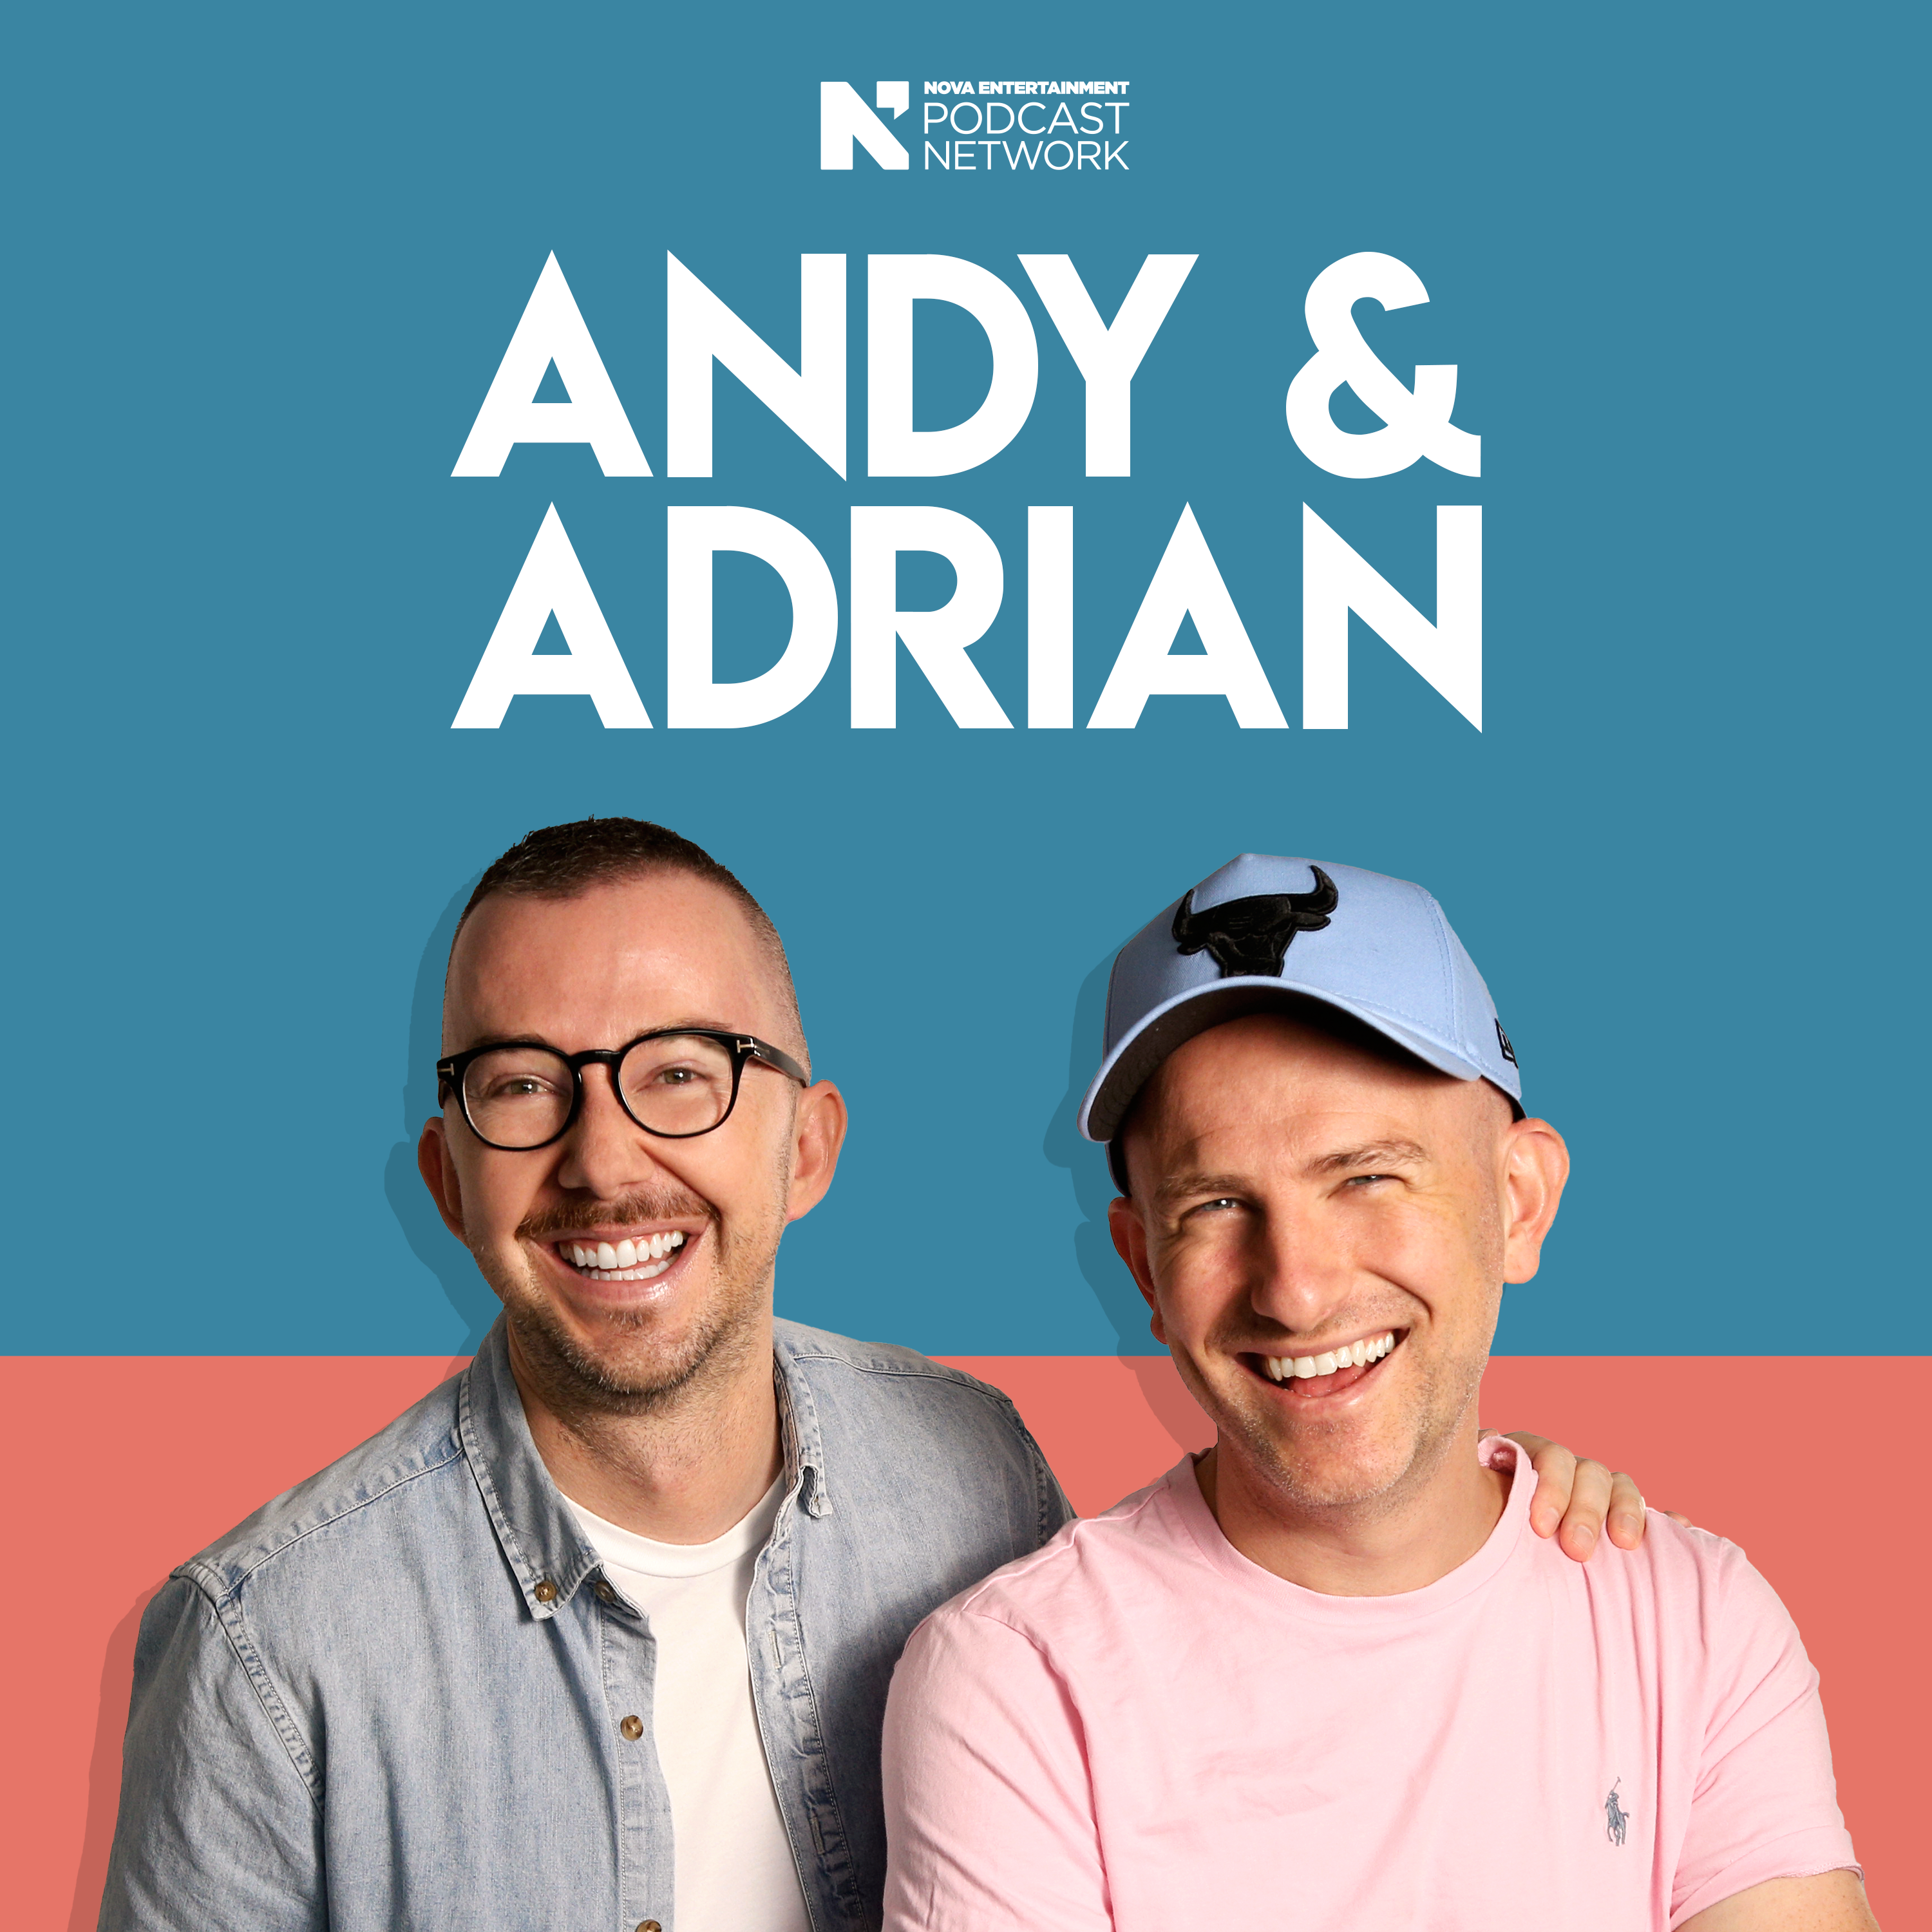 Andy’s clothing choices, Adrian’s new electronics, and how to cook rice.